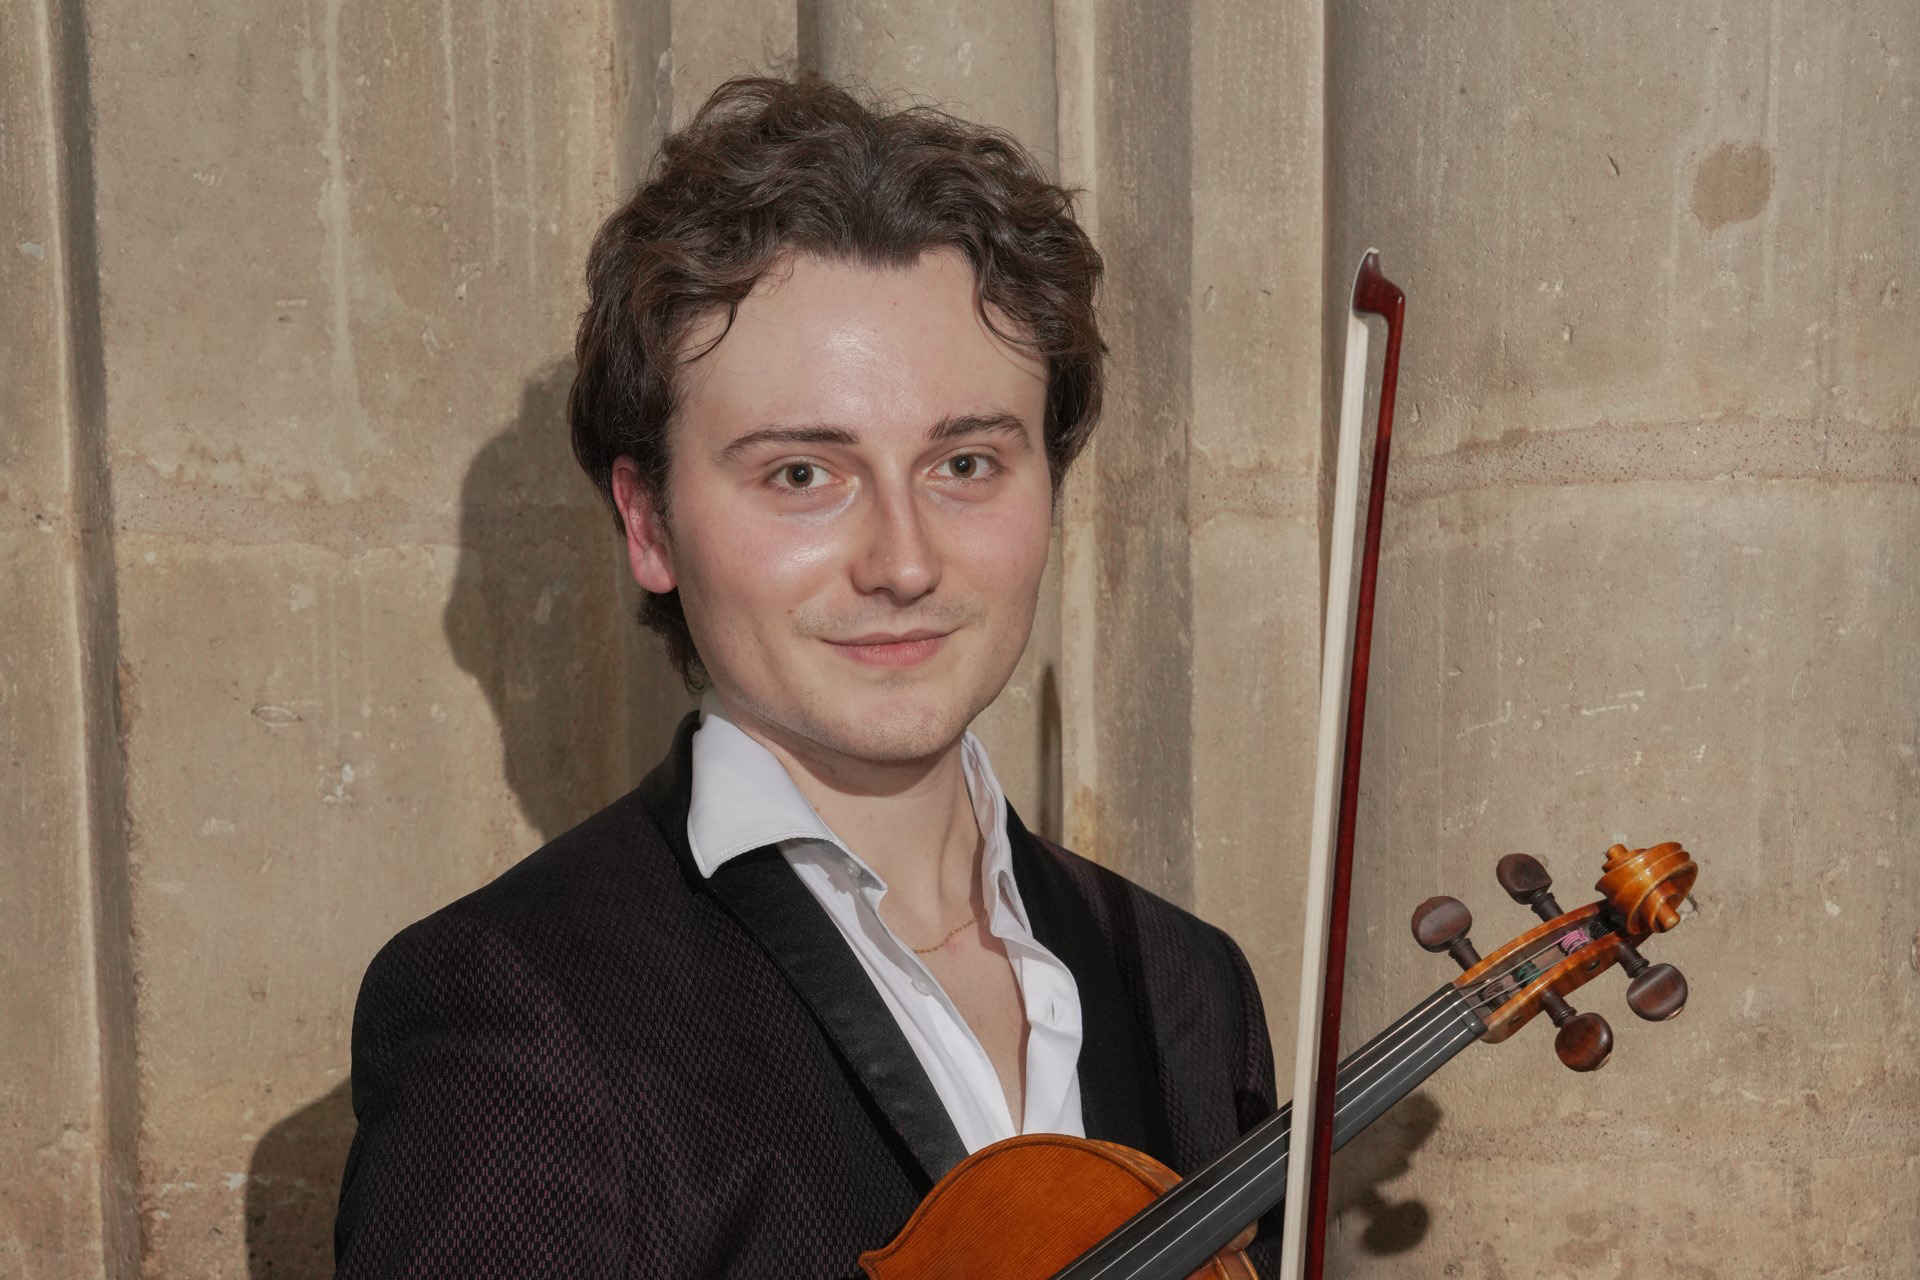 A man in a suit holding a violin under his arm and looking at the camera